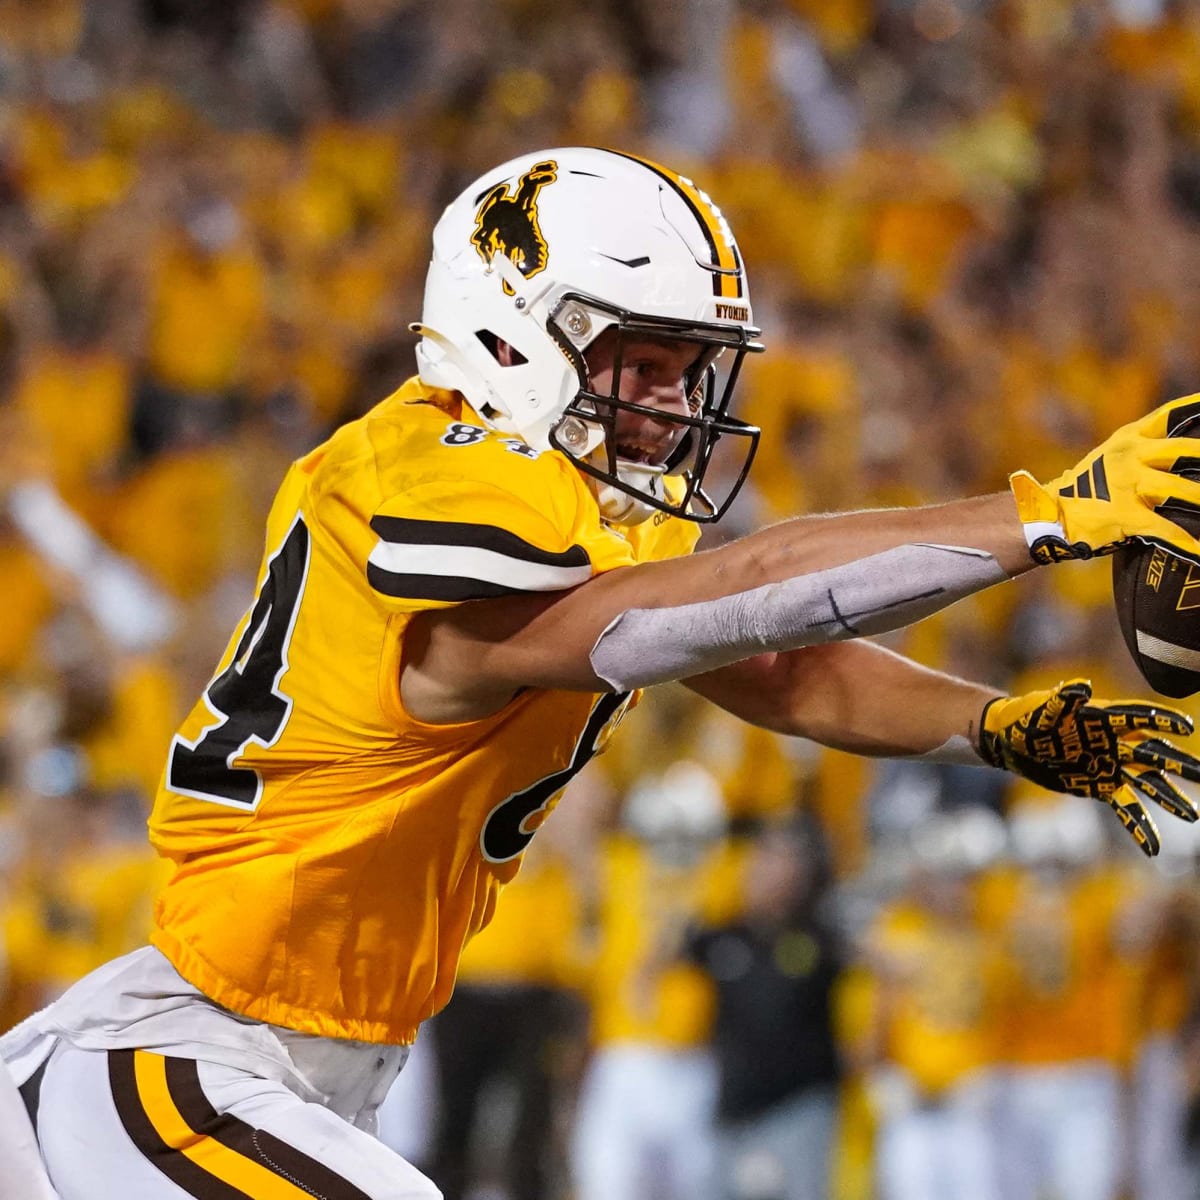 Texas Tech opens season at Wyoming and with high expectations